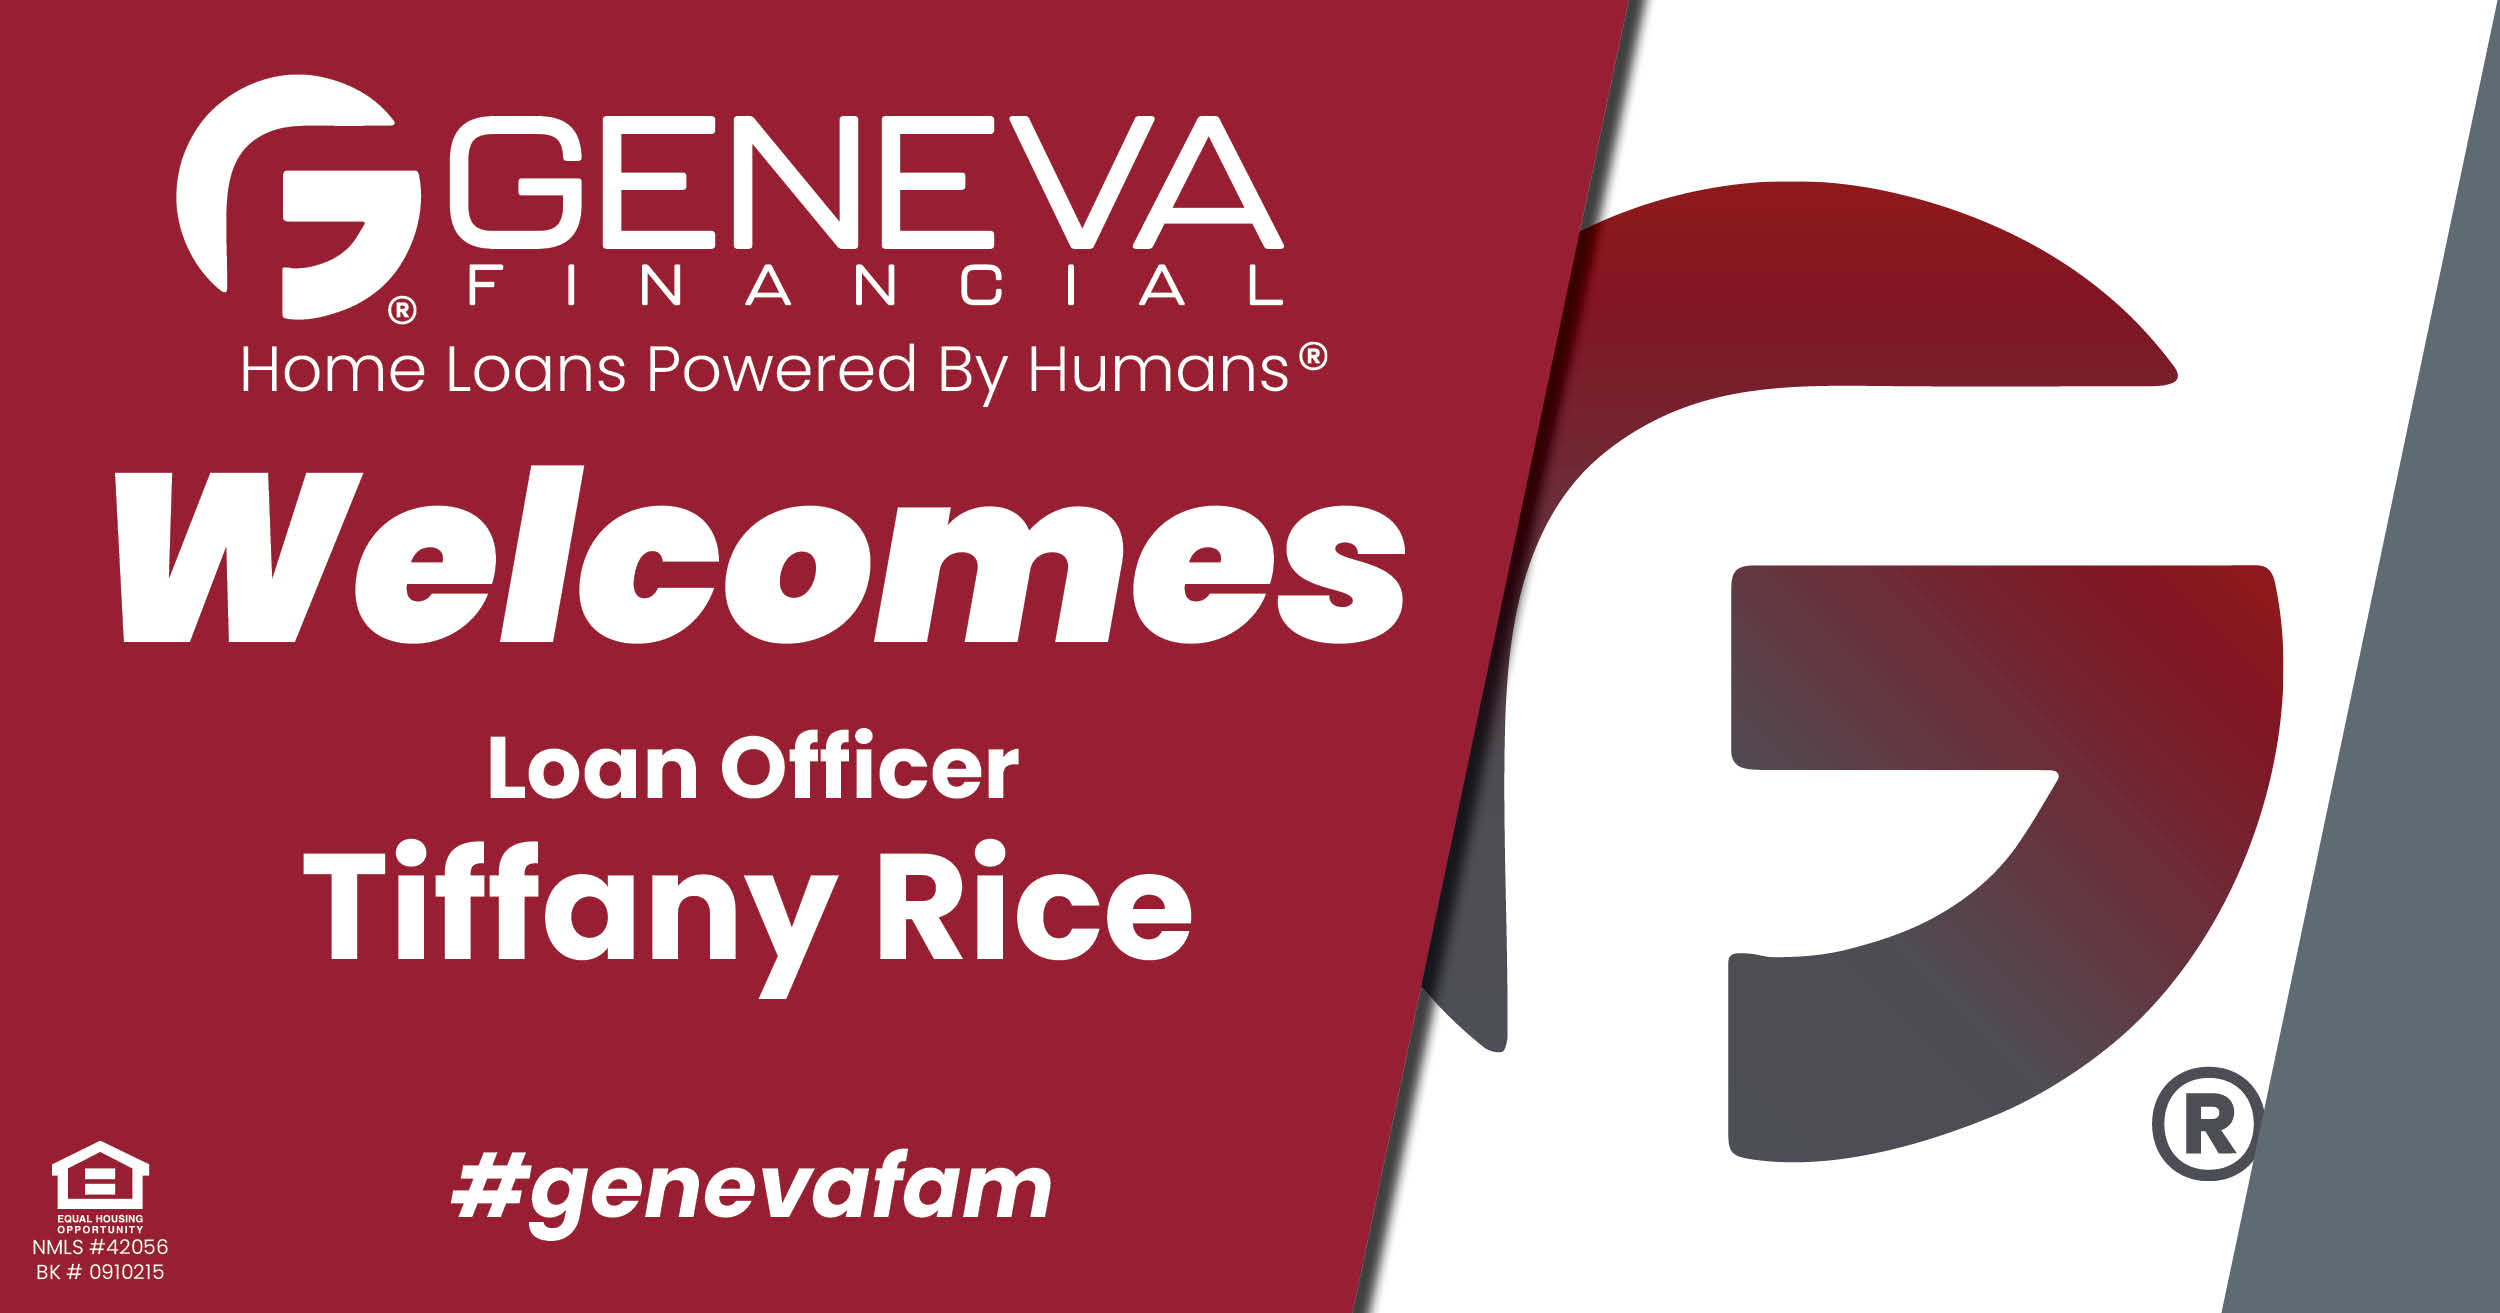 Geneva Financial Welcomes New Loan Officer Tiffany Rice to Phoenix, Arizona – Home Loans Powered by Humans®.